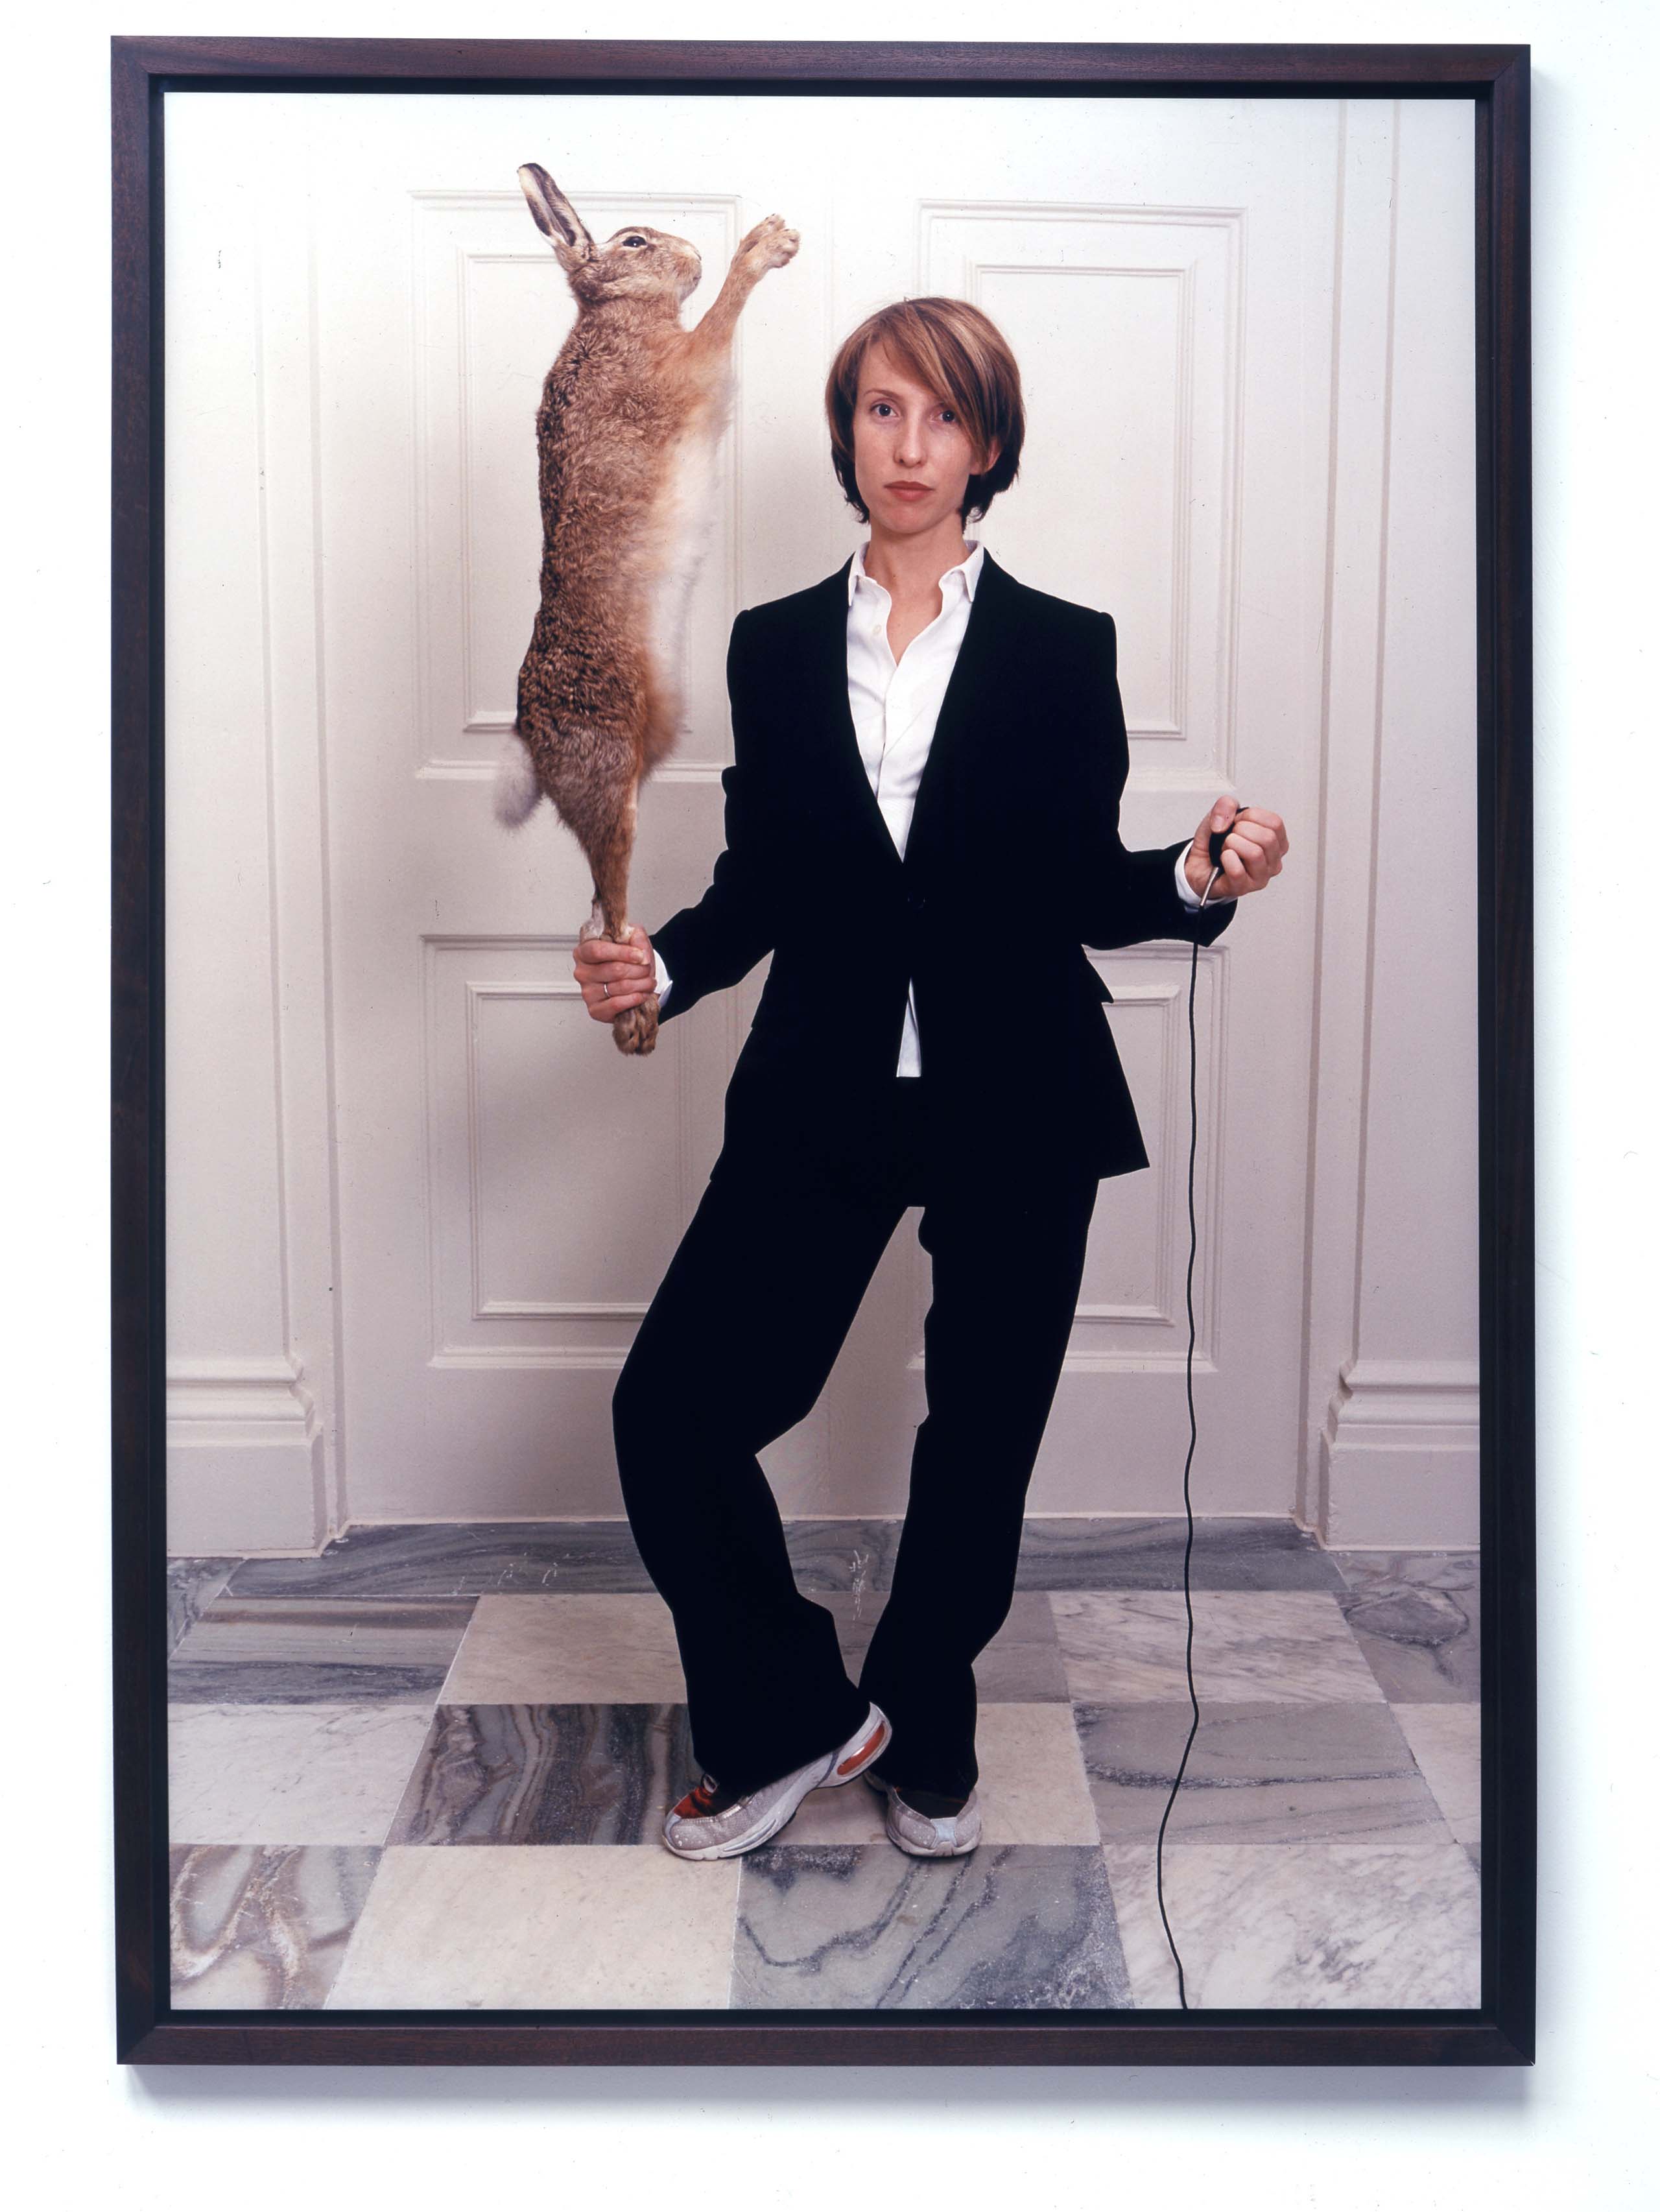 Self Portrait in a Single Breasted Suit with Hare, 2001.